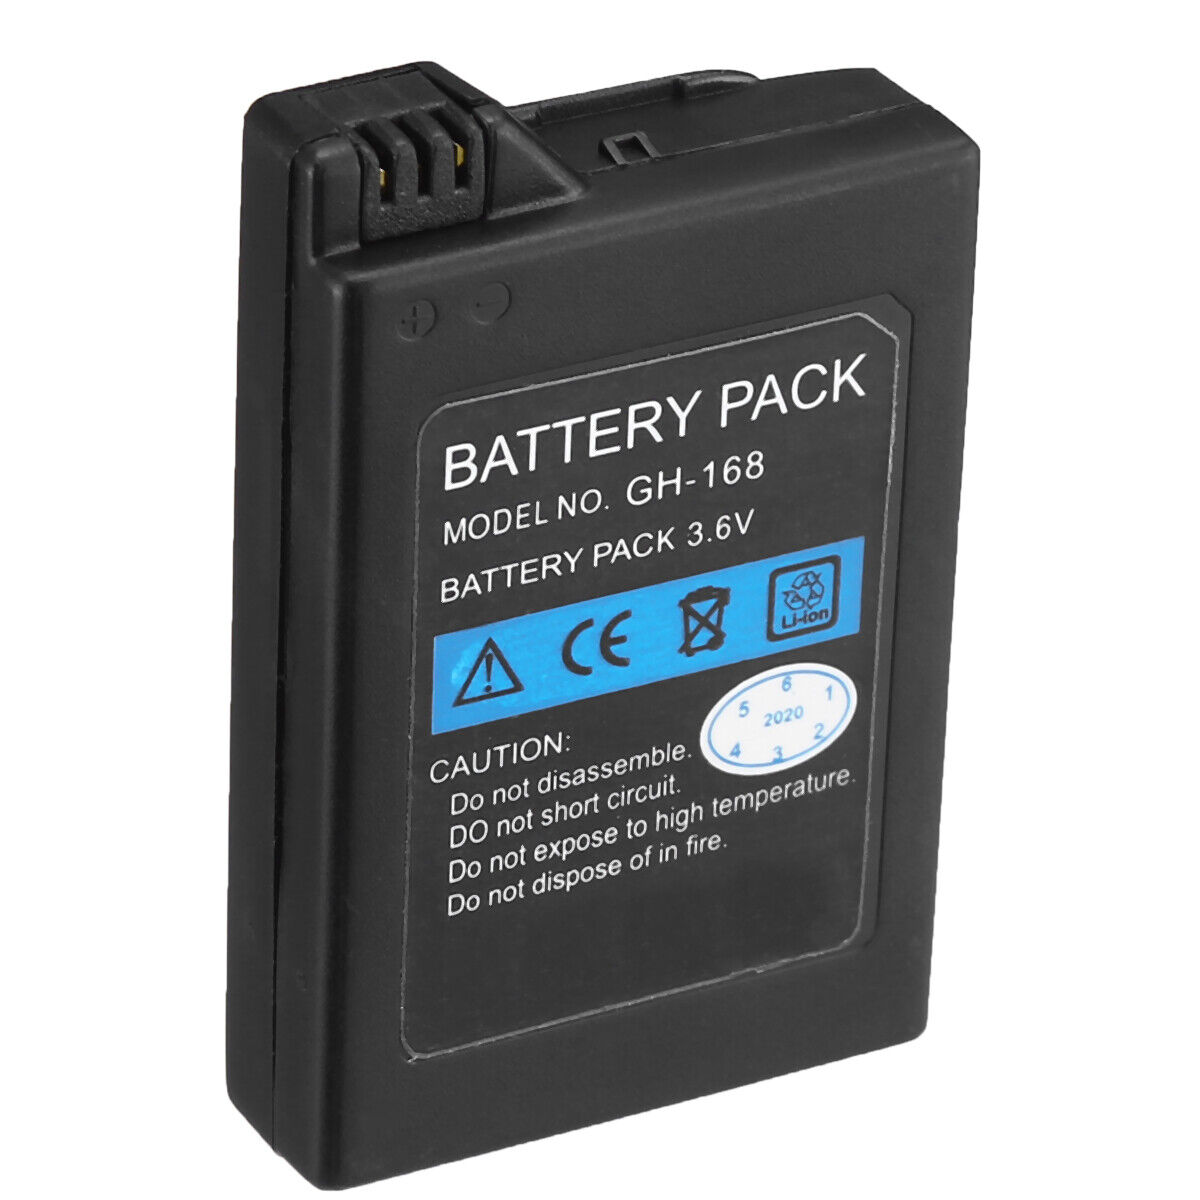 2 Pack - 3600mAh Replacement Battery Packs for Sony PSP PSP-1000 1000 1001 Unbranded Does not apply - фотография #10